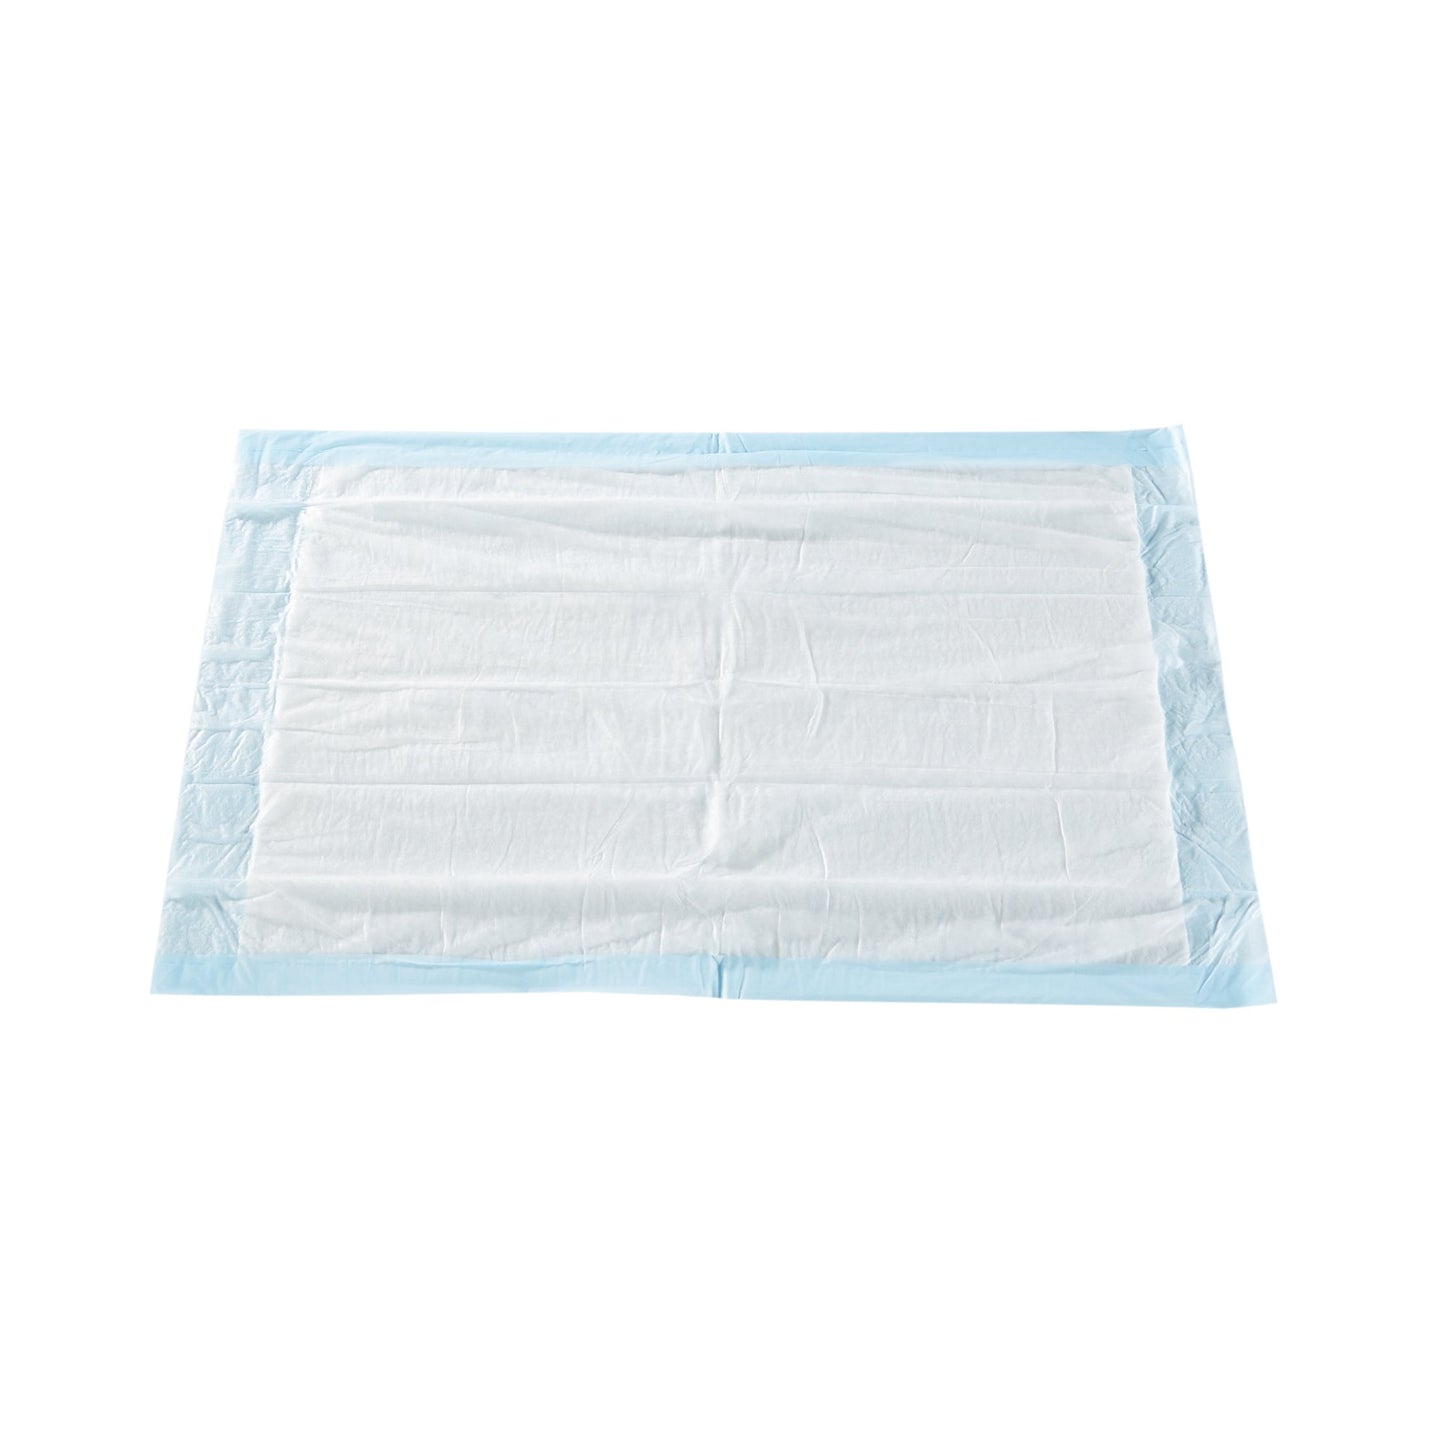 McKesson Classic Light Absorbency Underpad, 17 x 24 ", 300 ct